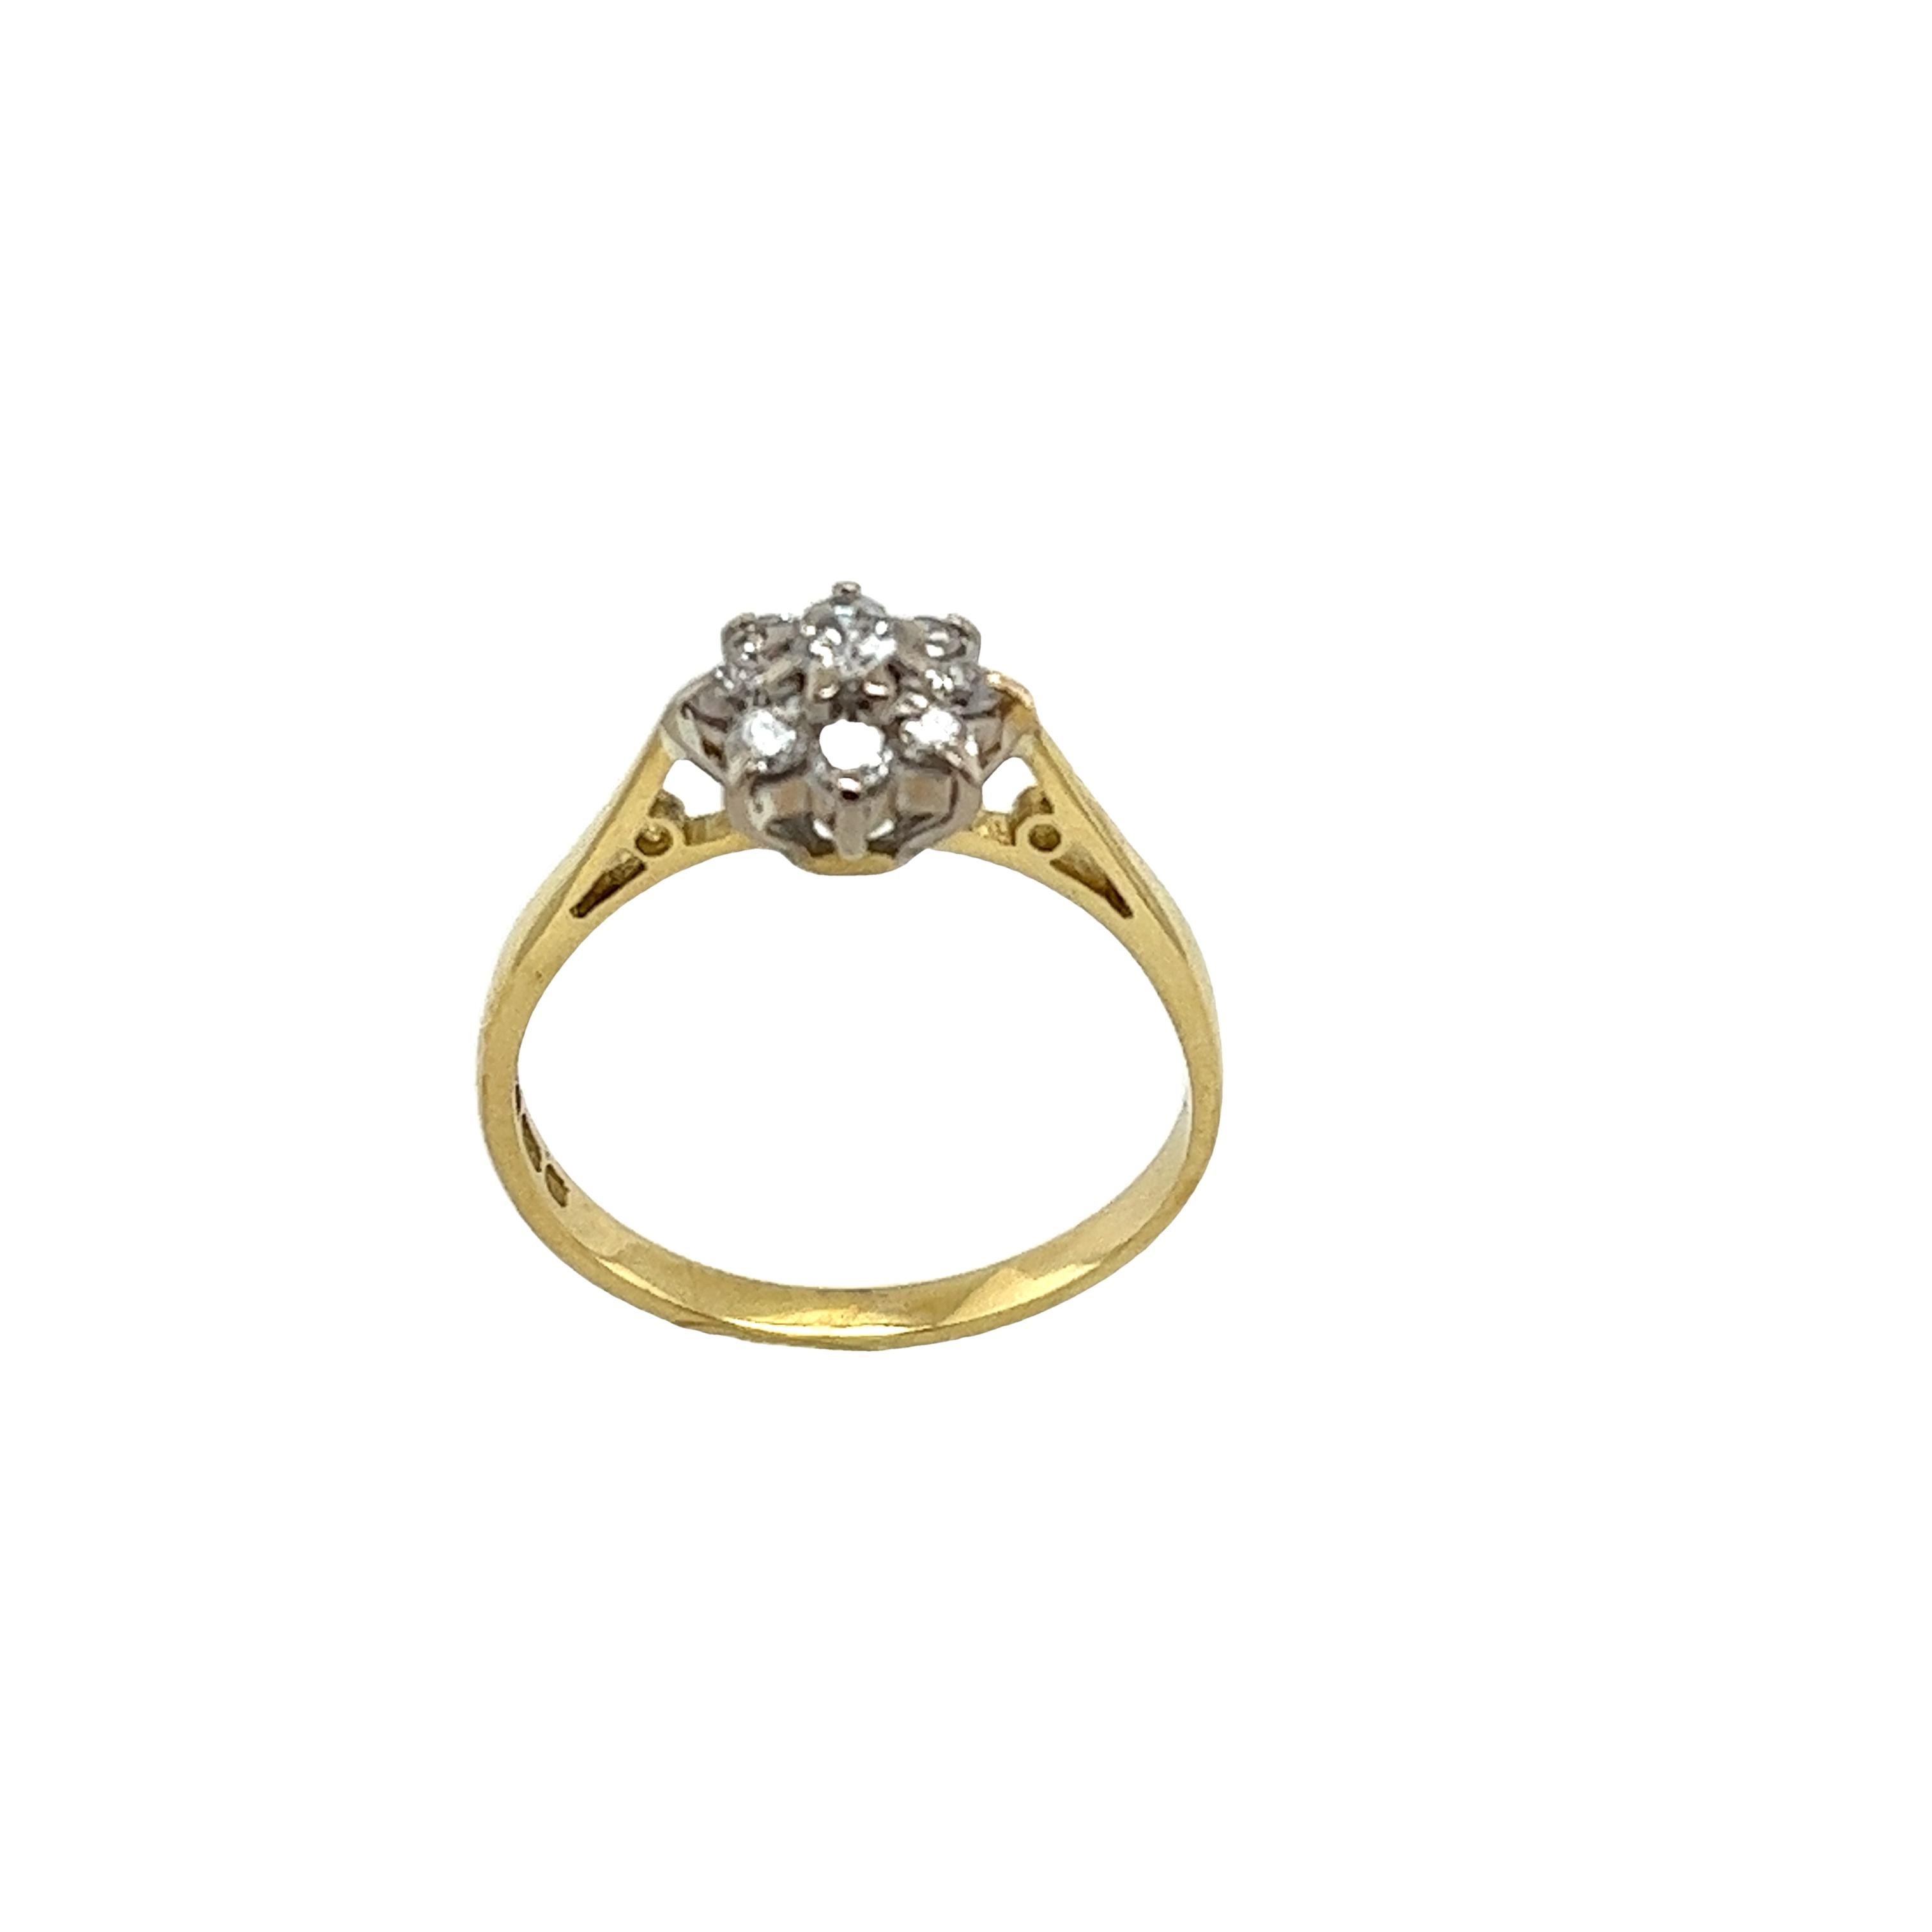 18ct Yellow & White Gold Diamond Cluster Ring, Set With 2.25ct Round Diamonds In Excellent Condition For Sale In London, GB